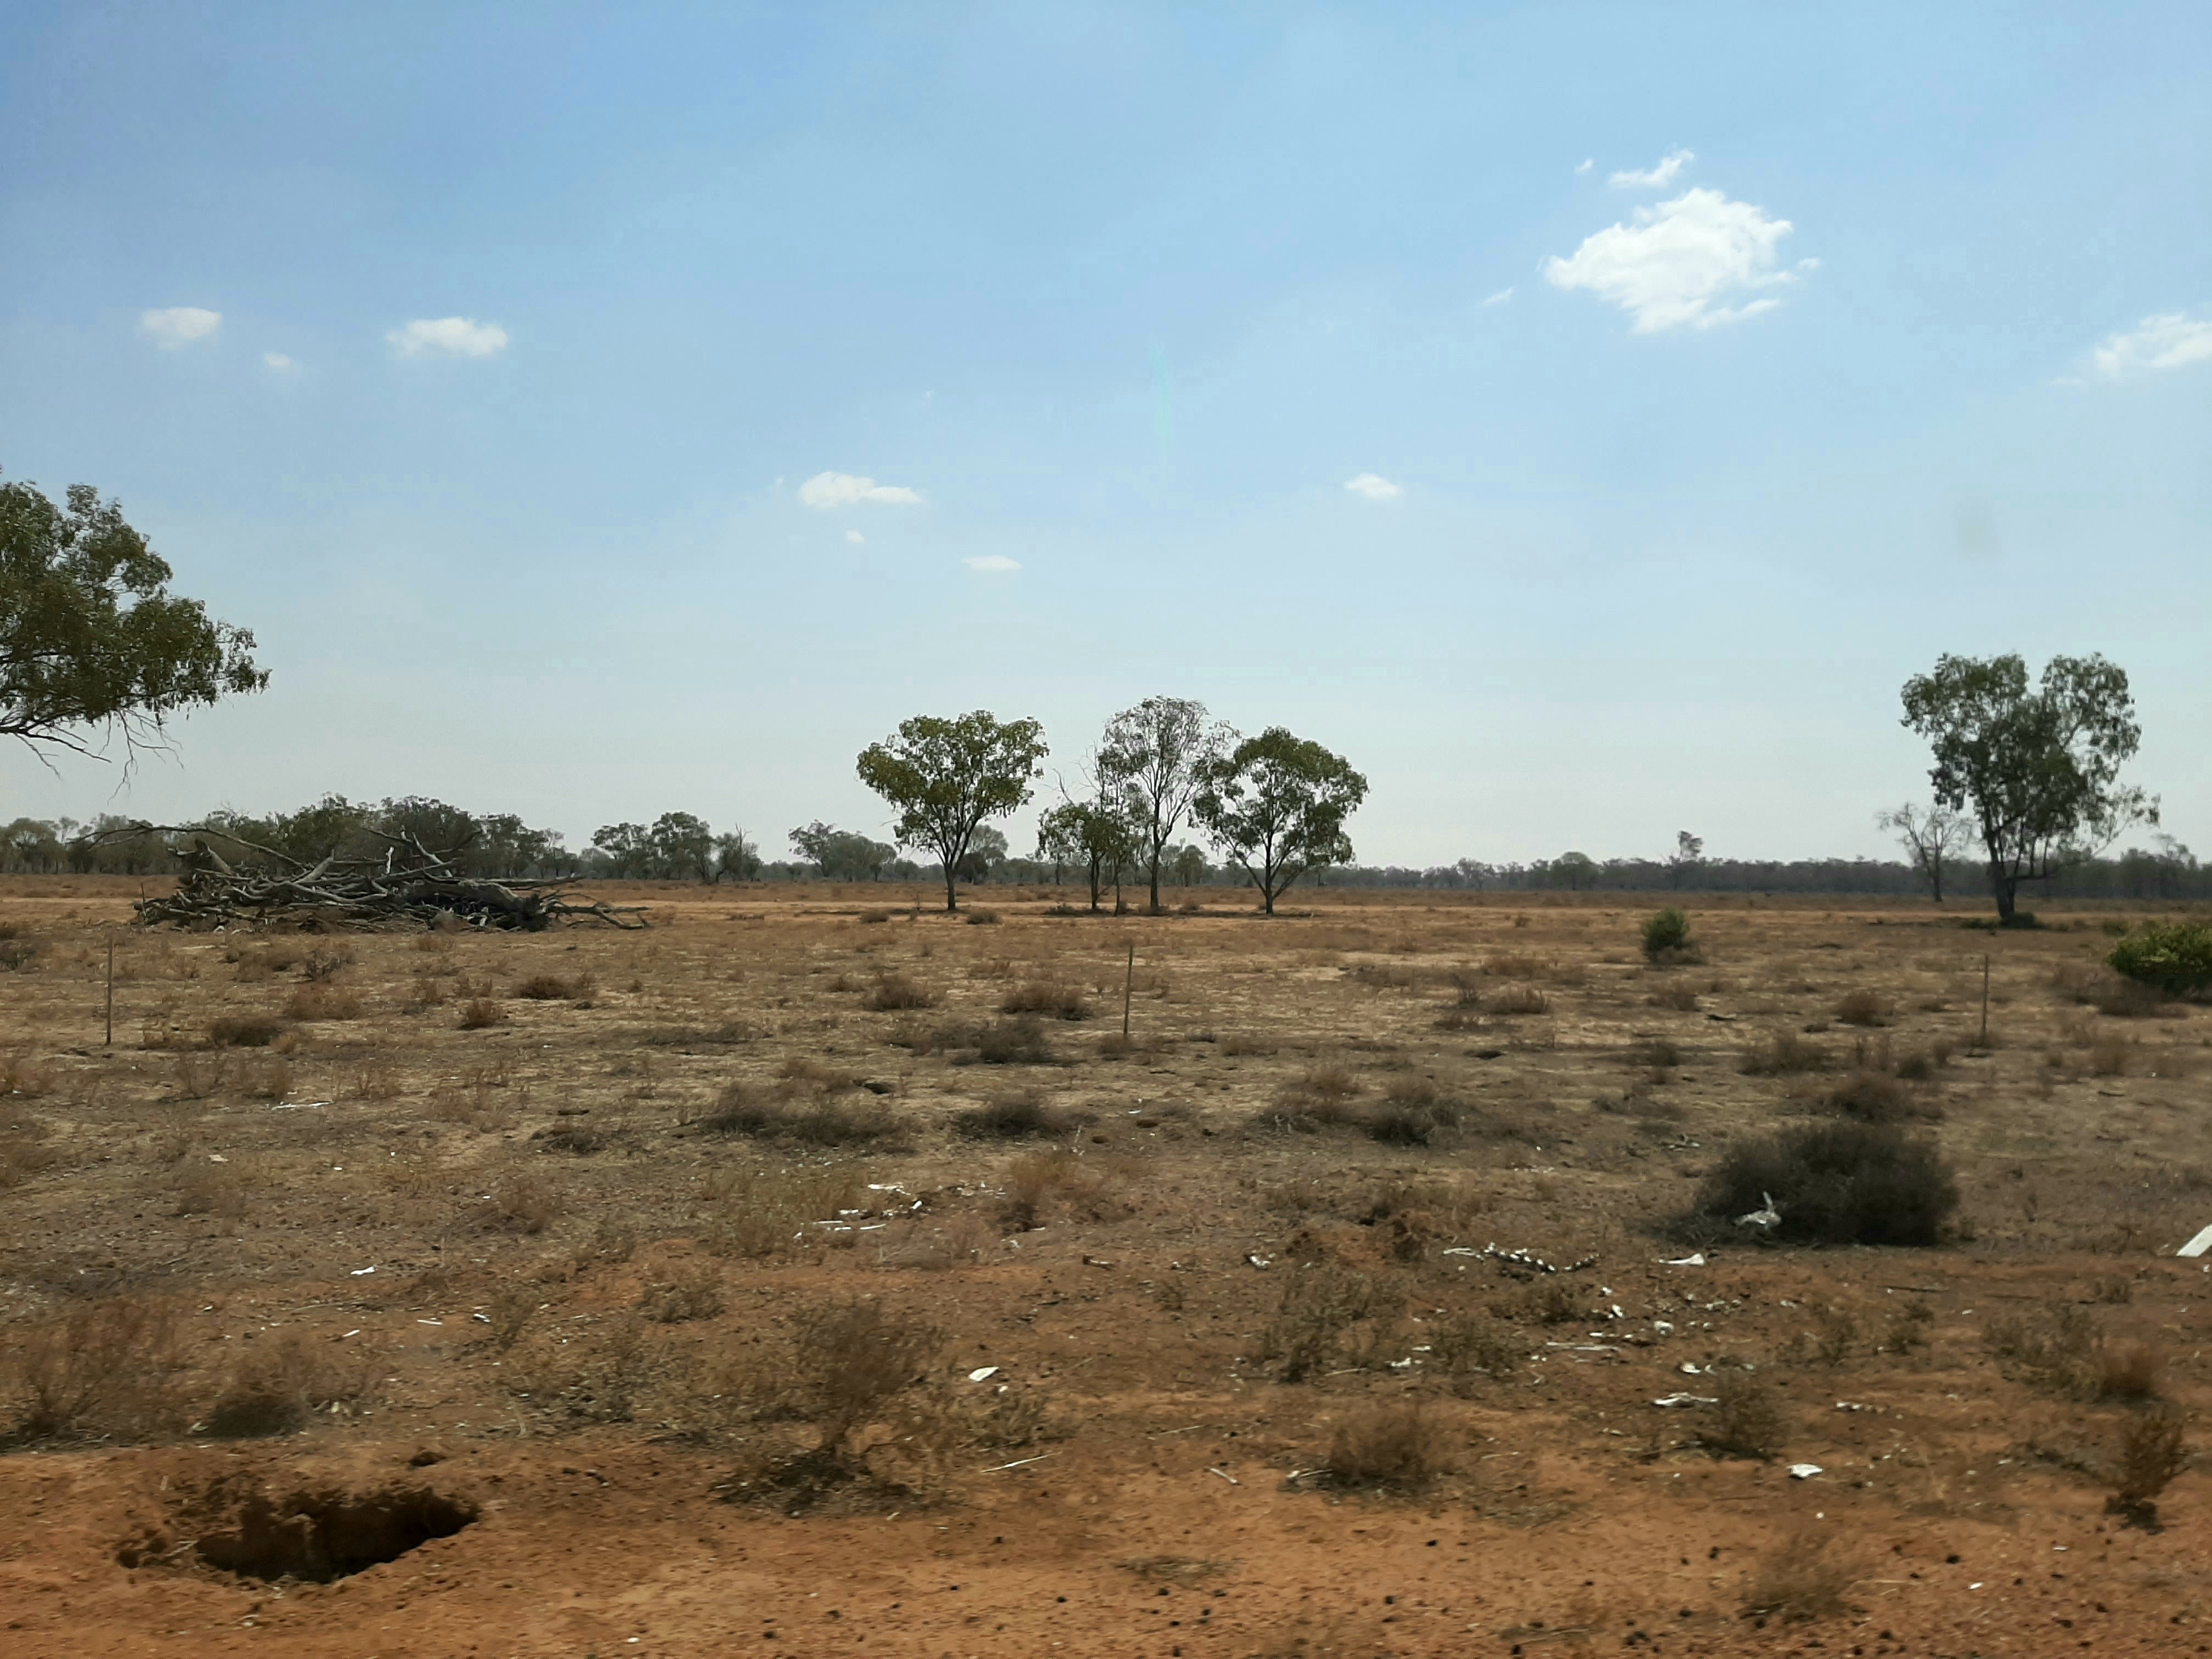 An image of an open plain with some small shrubs between mostly dirt. There are 5 trees in the distance - 3 of these are together in the centre and there are 1 on each side at the edge of the picture. 